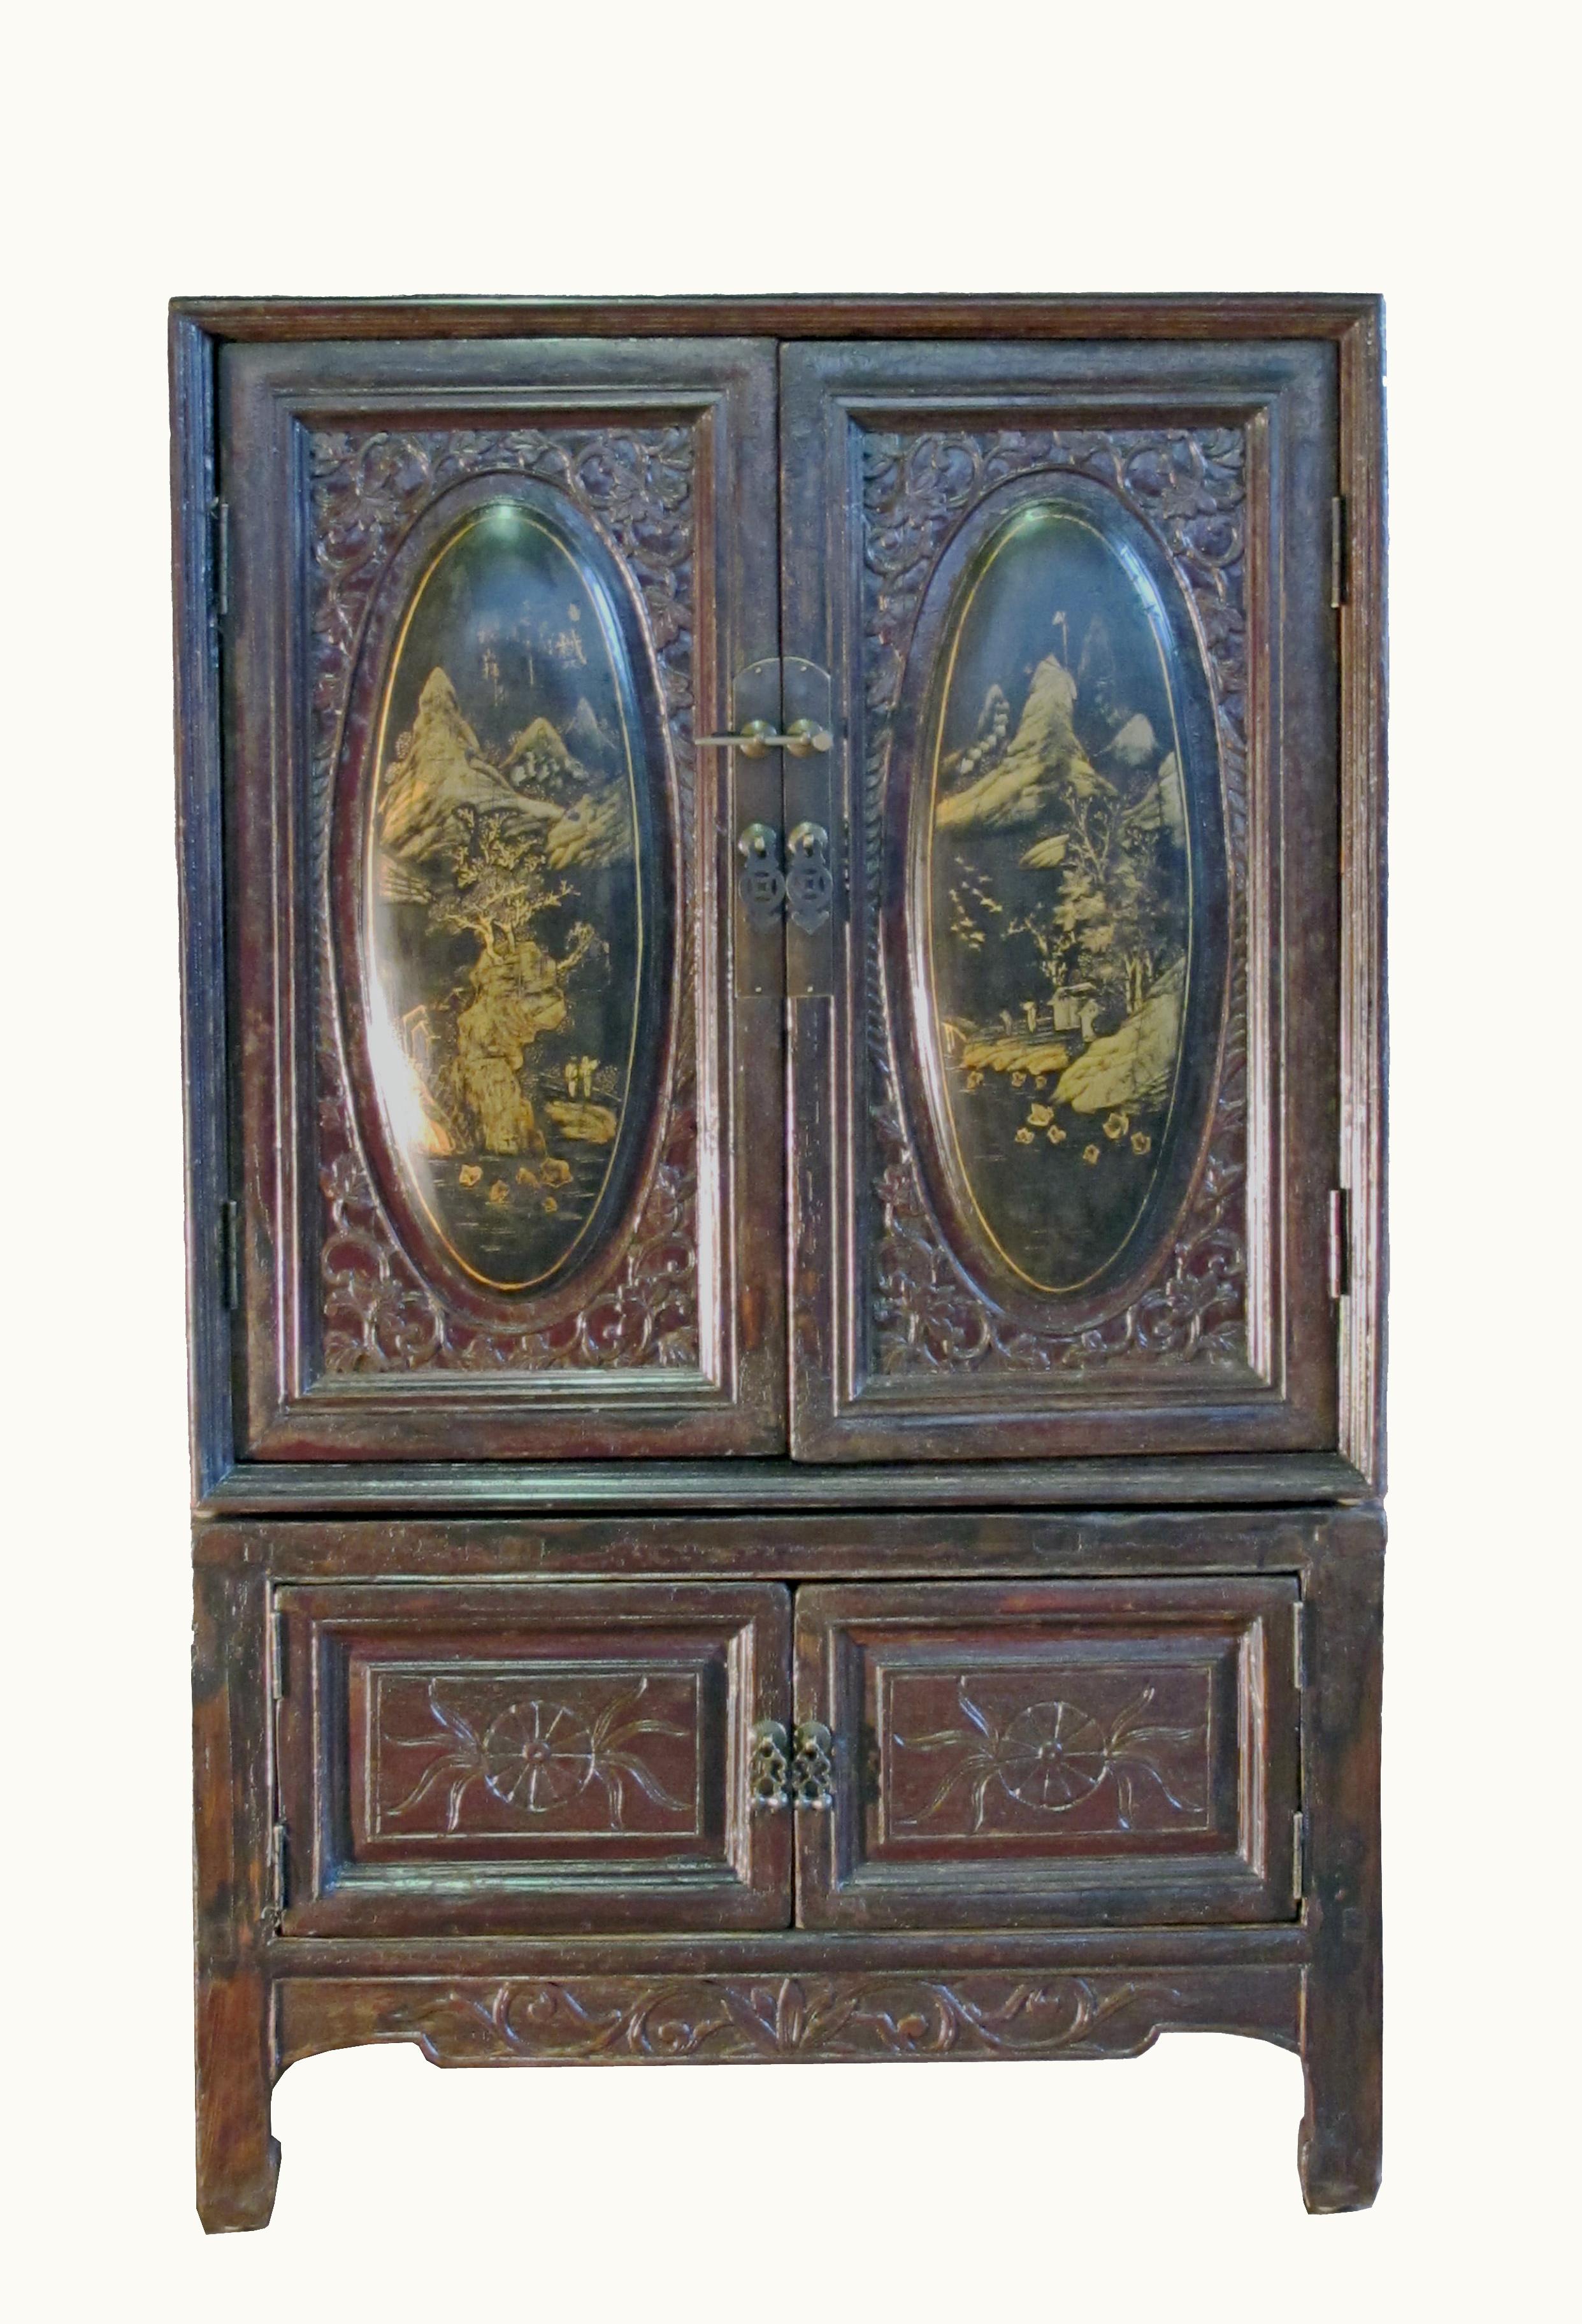 Chaozhou Cabinet with Painted and Carved Panels 2 In Good Condition For Sale In Merrimack, NH